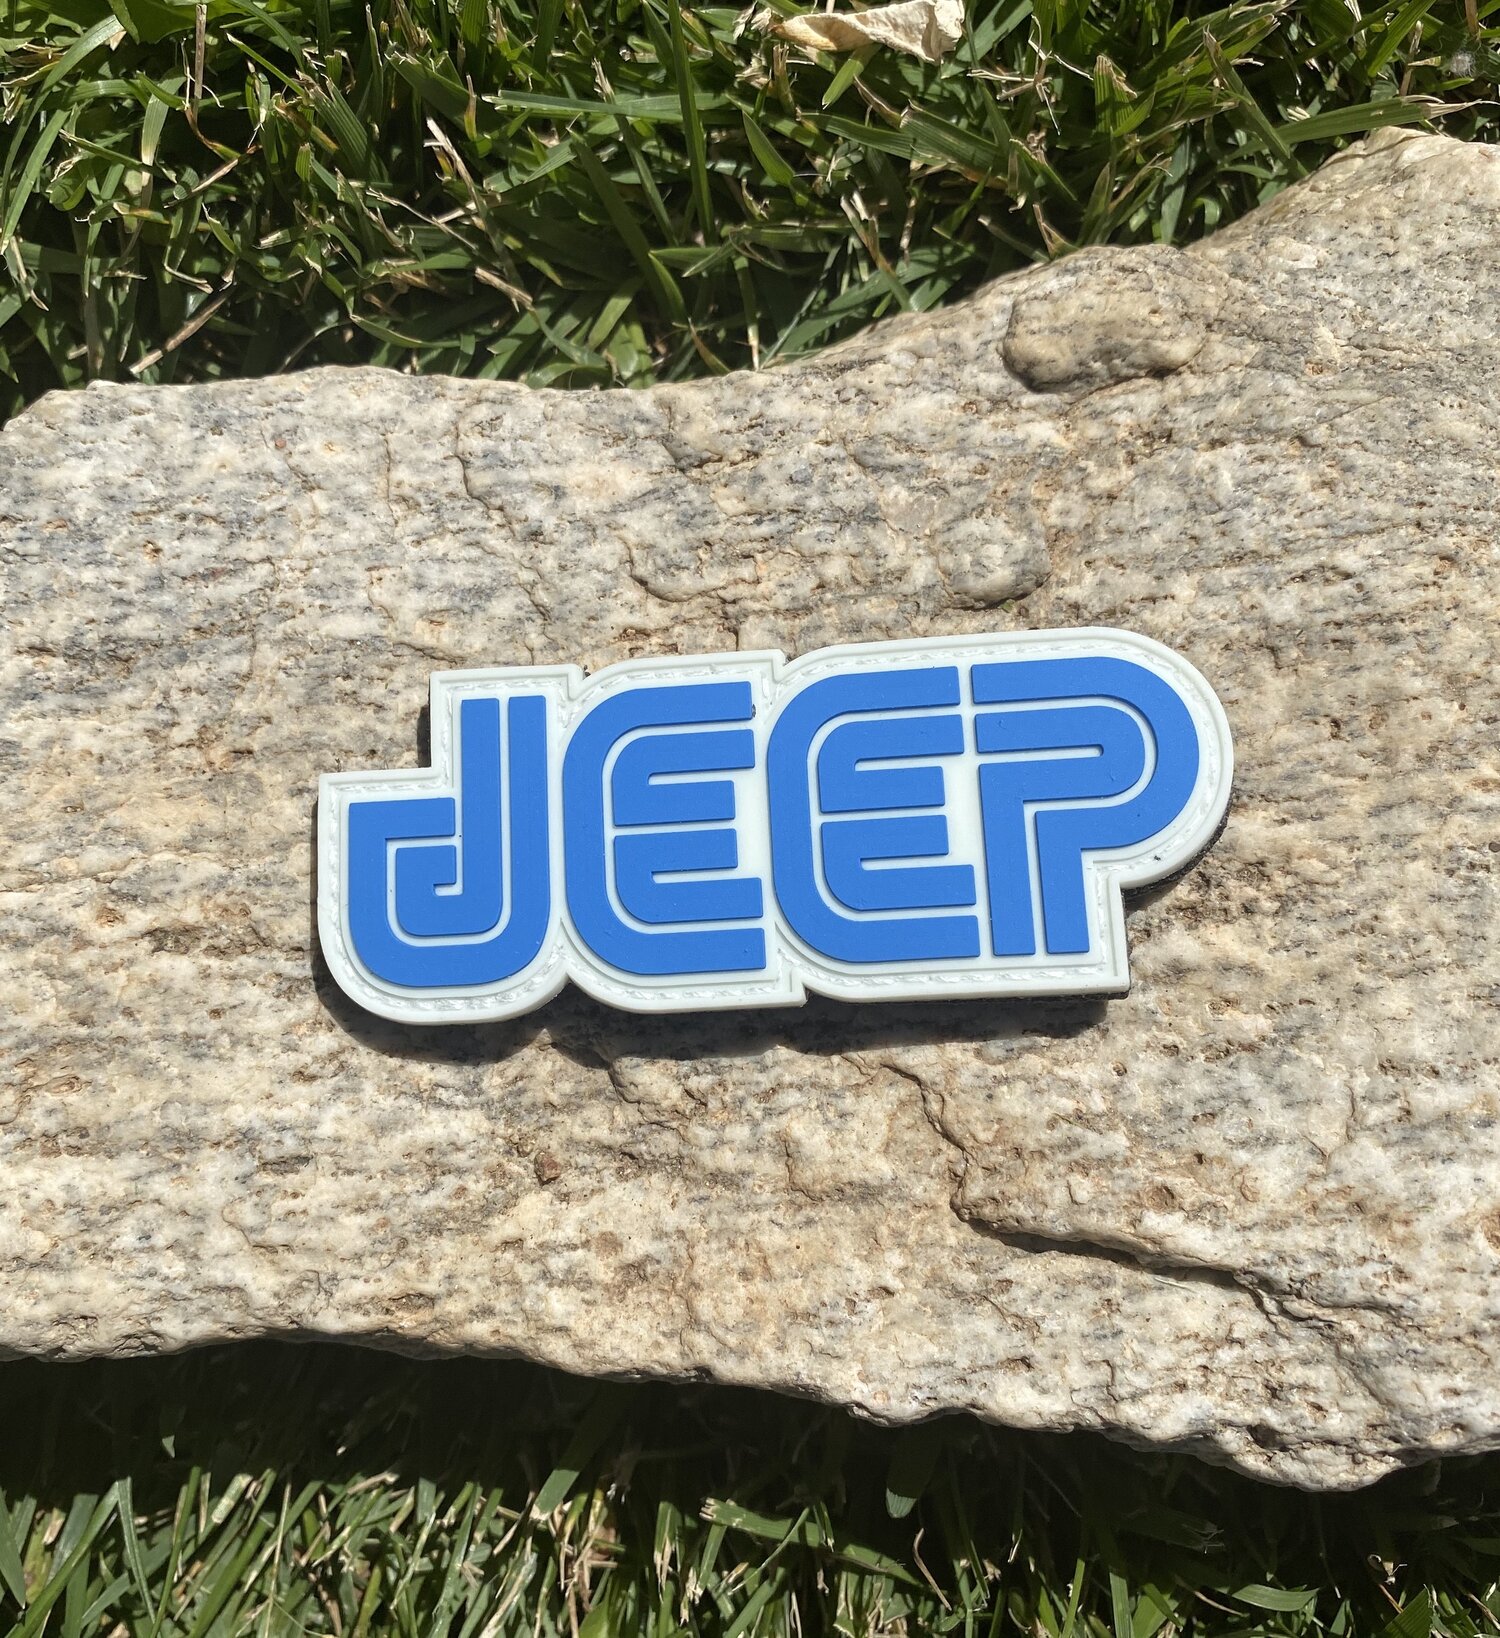 Jeep Retromatic Logo Hook and Loop Patch